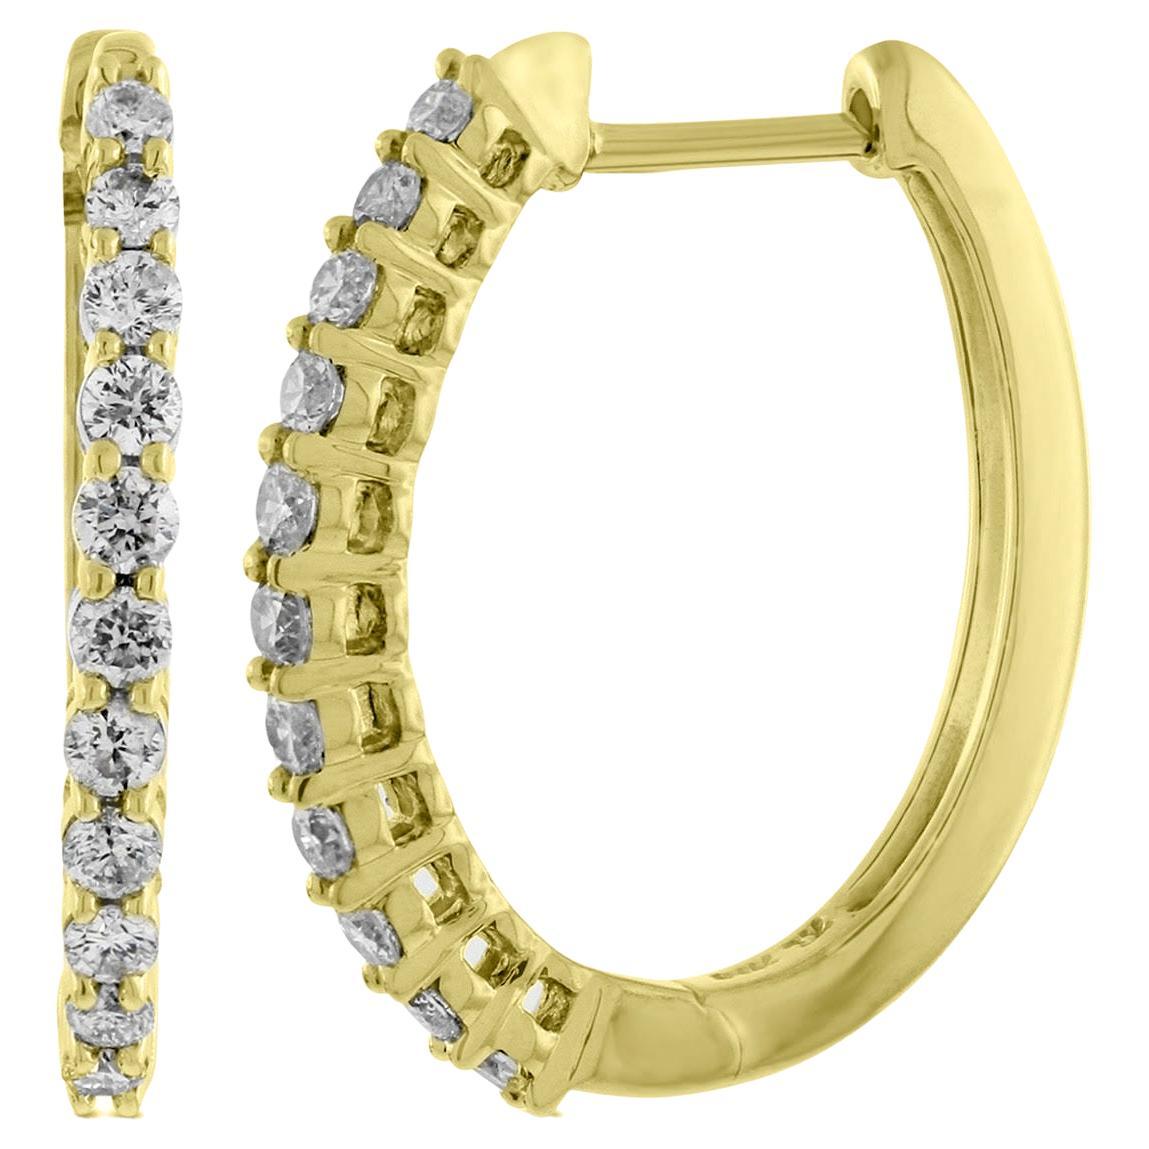 .75 Carat Total Weight Diamond Outside Round Hoop Earrings in 14K Yellow Gold